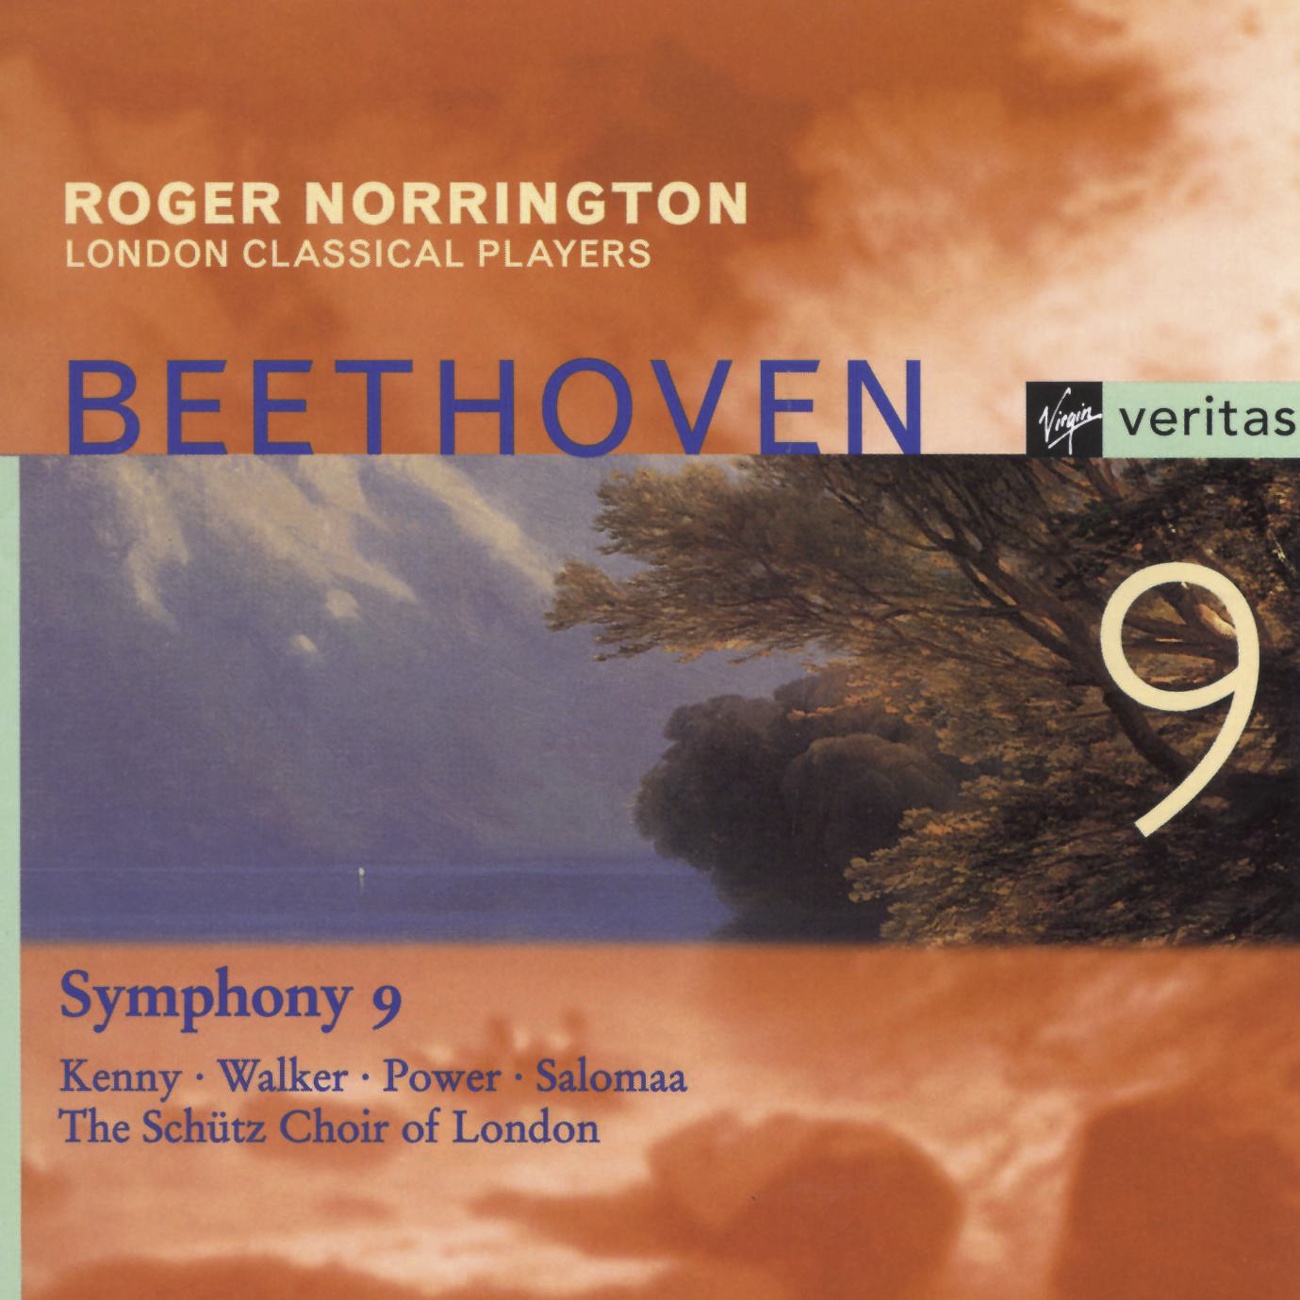 BEETHOVEN: SYMPHONY NO. 9 IN D-MIN, OP 125 'CHORAL': III. ADAGIO MOLTO E CANTABILE